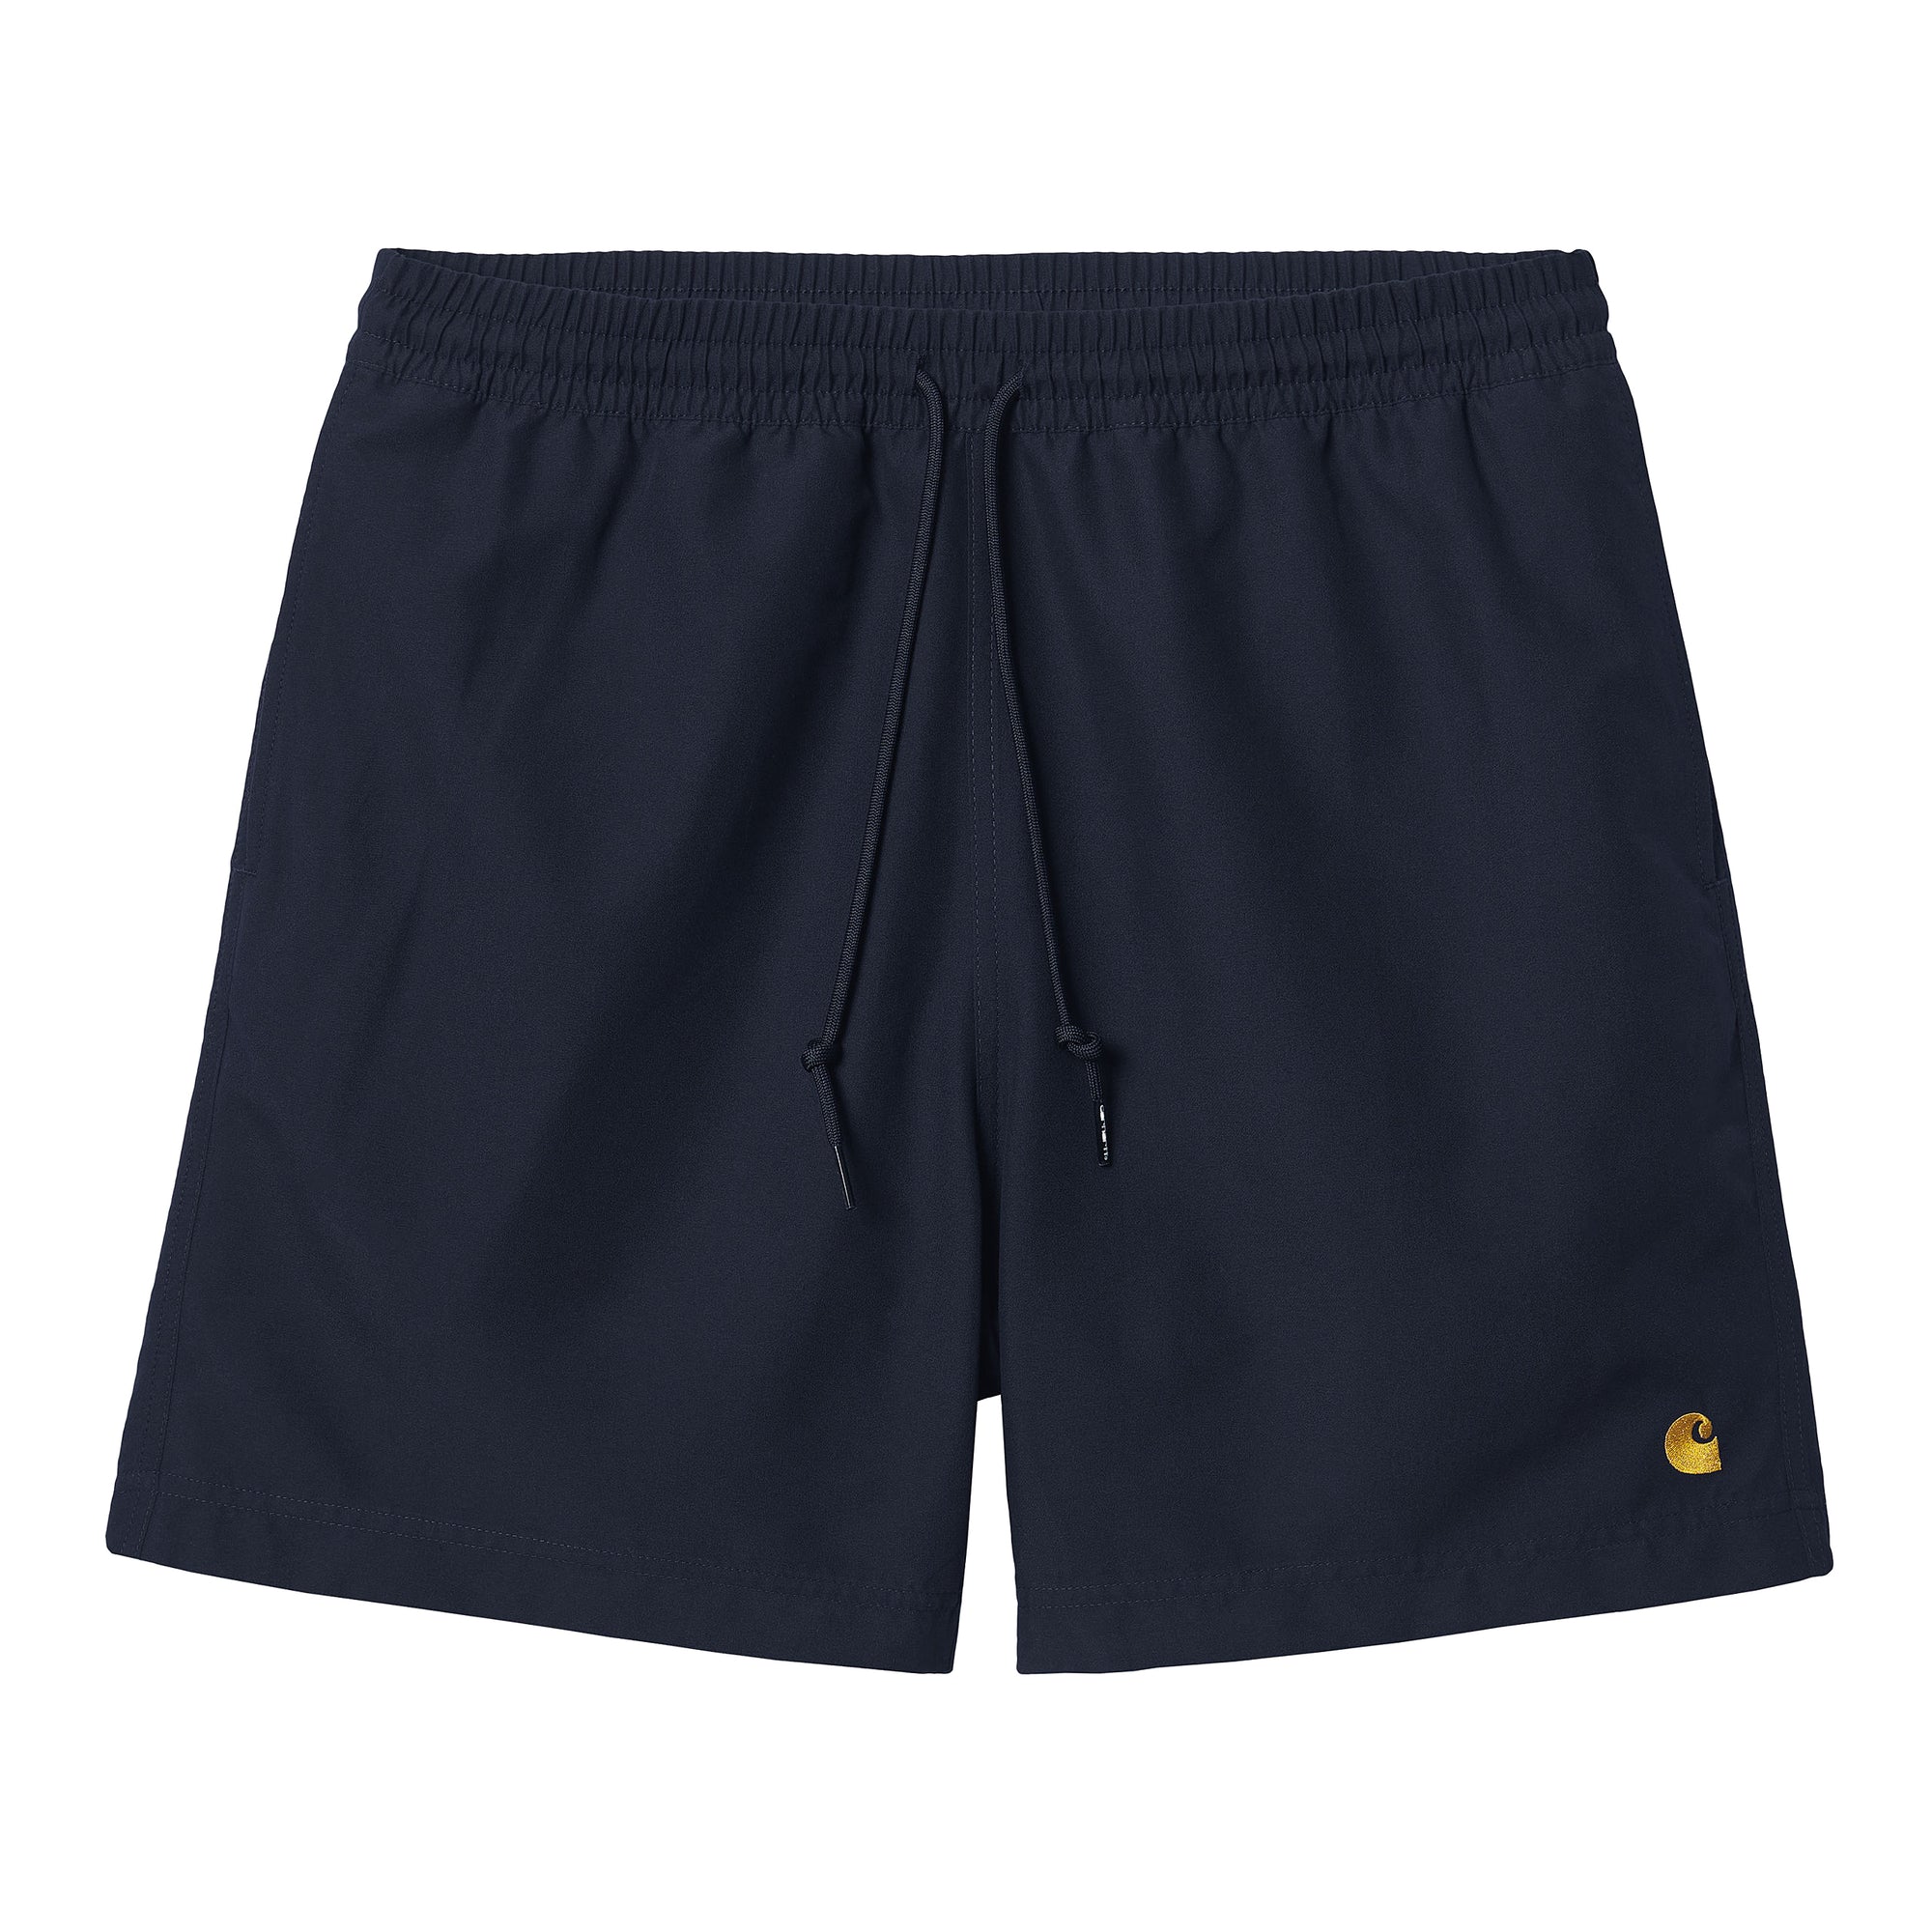 Chase Swim Trunk DARK NAVY/GOLD
The Chase Swim Trunks are constructed from lightweight fabric with water-repellent and fast-drying qualities. Lined with mesh, they also feature an embroidered Carhartt WIP ‘C’ logo on the left leg, two side seam pockets, an adjustable waistband, and a key holder in the back pocket.

I026235_00F_XX
100% polyester
Regular fit
Water-repellent
Mesh lining
Side seam pockets
Back pocket with key holder
 CARHARTT WIP